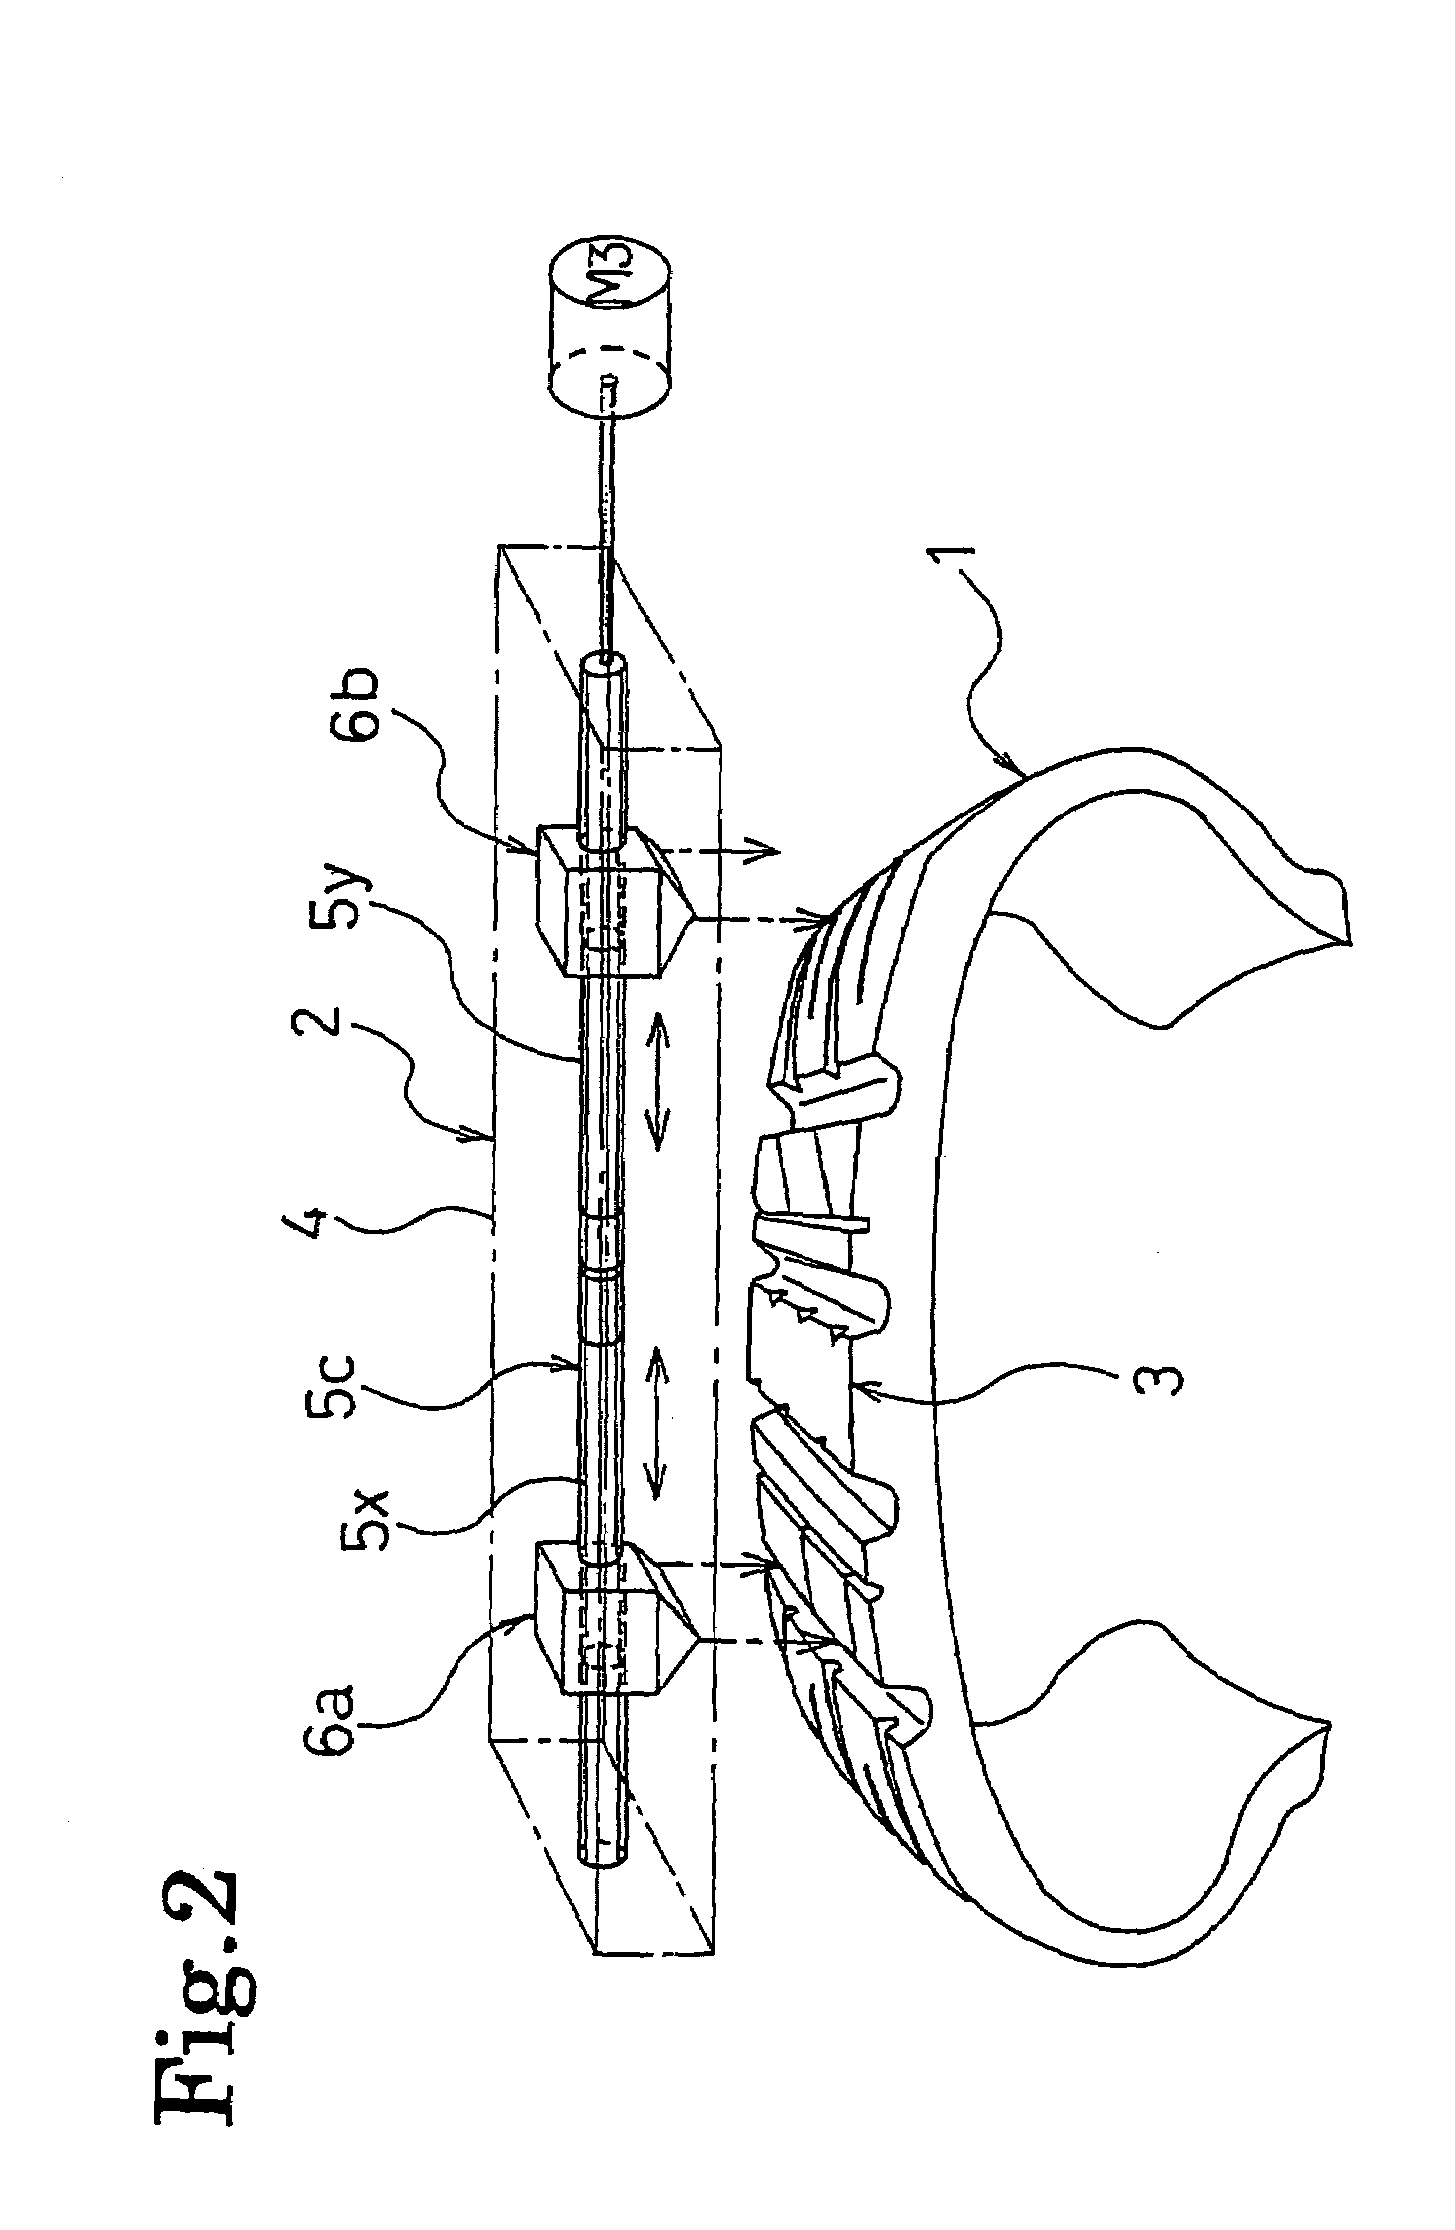 Method of and apparatus for determining tire shapes